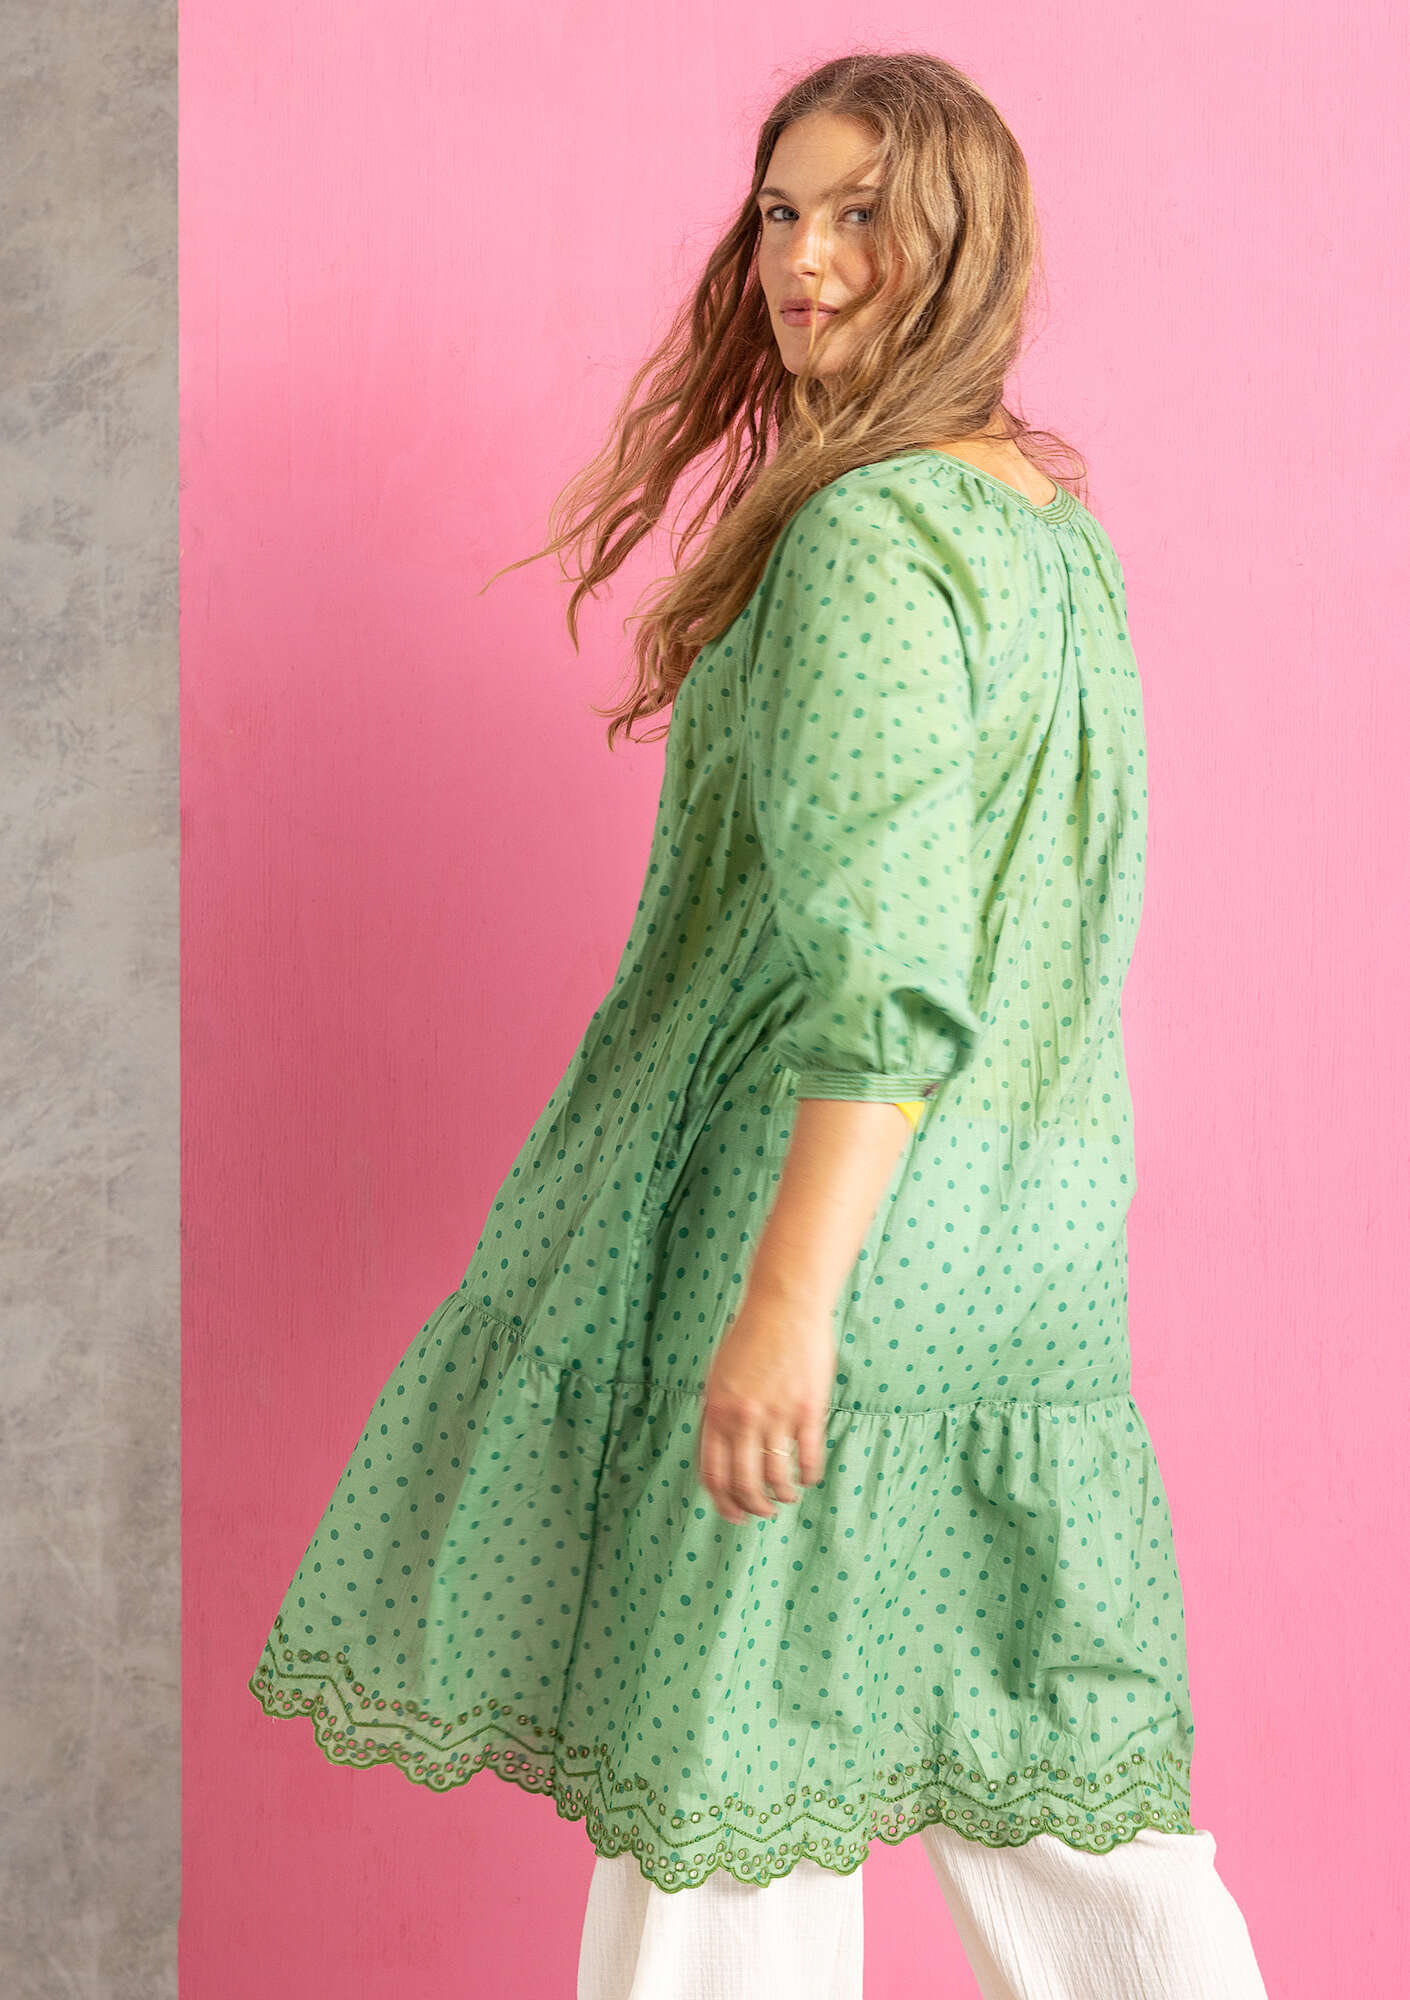 Woven “Lilly” dress in organic cotton dusty green